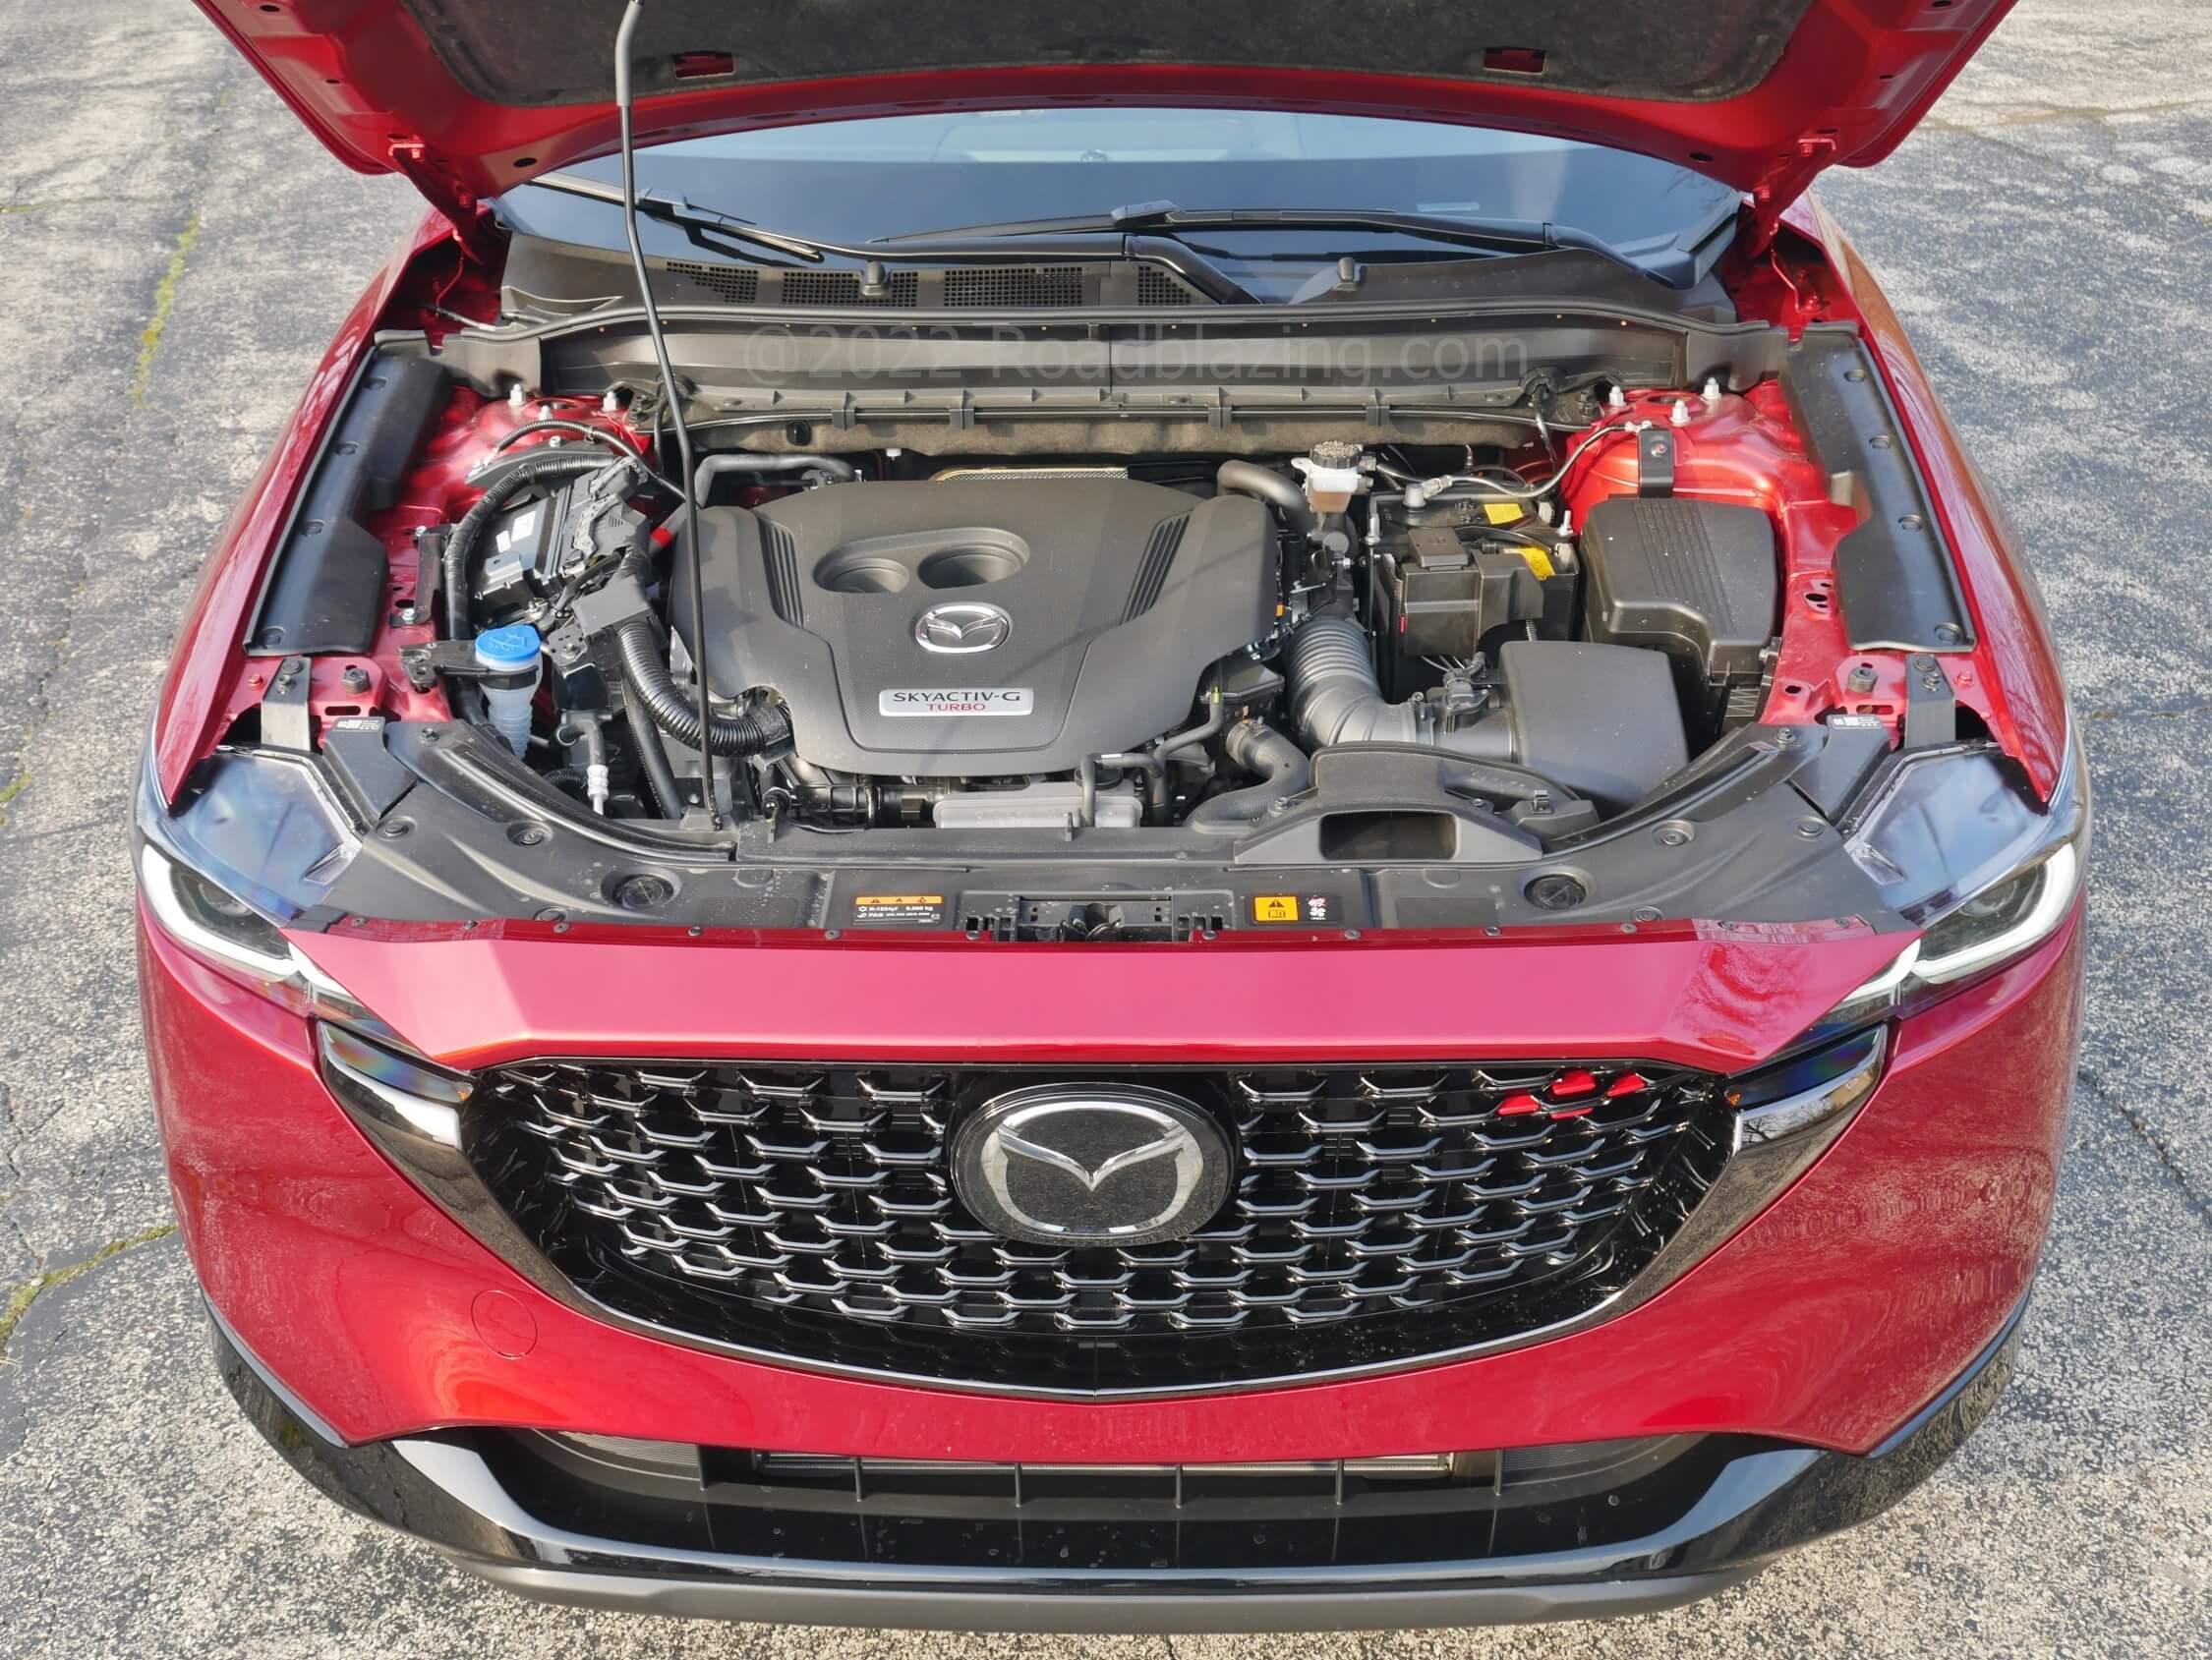 2022 Mazda CX-5 2.5T Turbo AWD: 6 newfound horsepower makes this among the quickest volume AWD CUVs in the US, netting 23 combined MPG